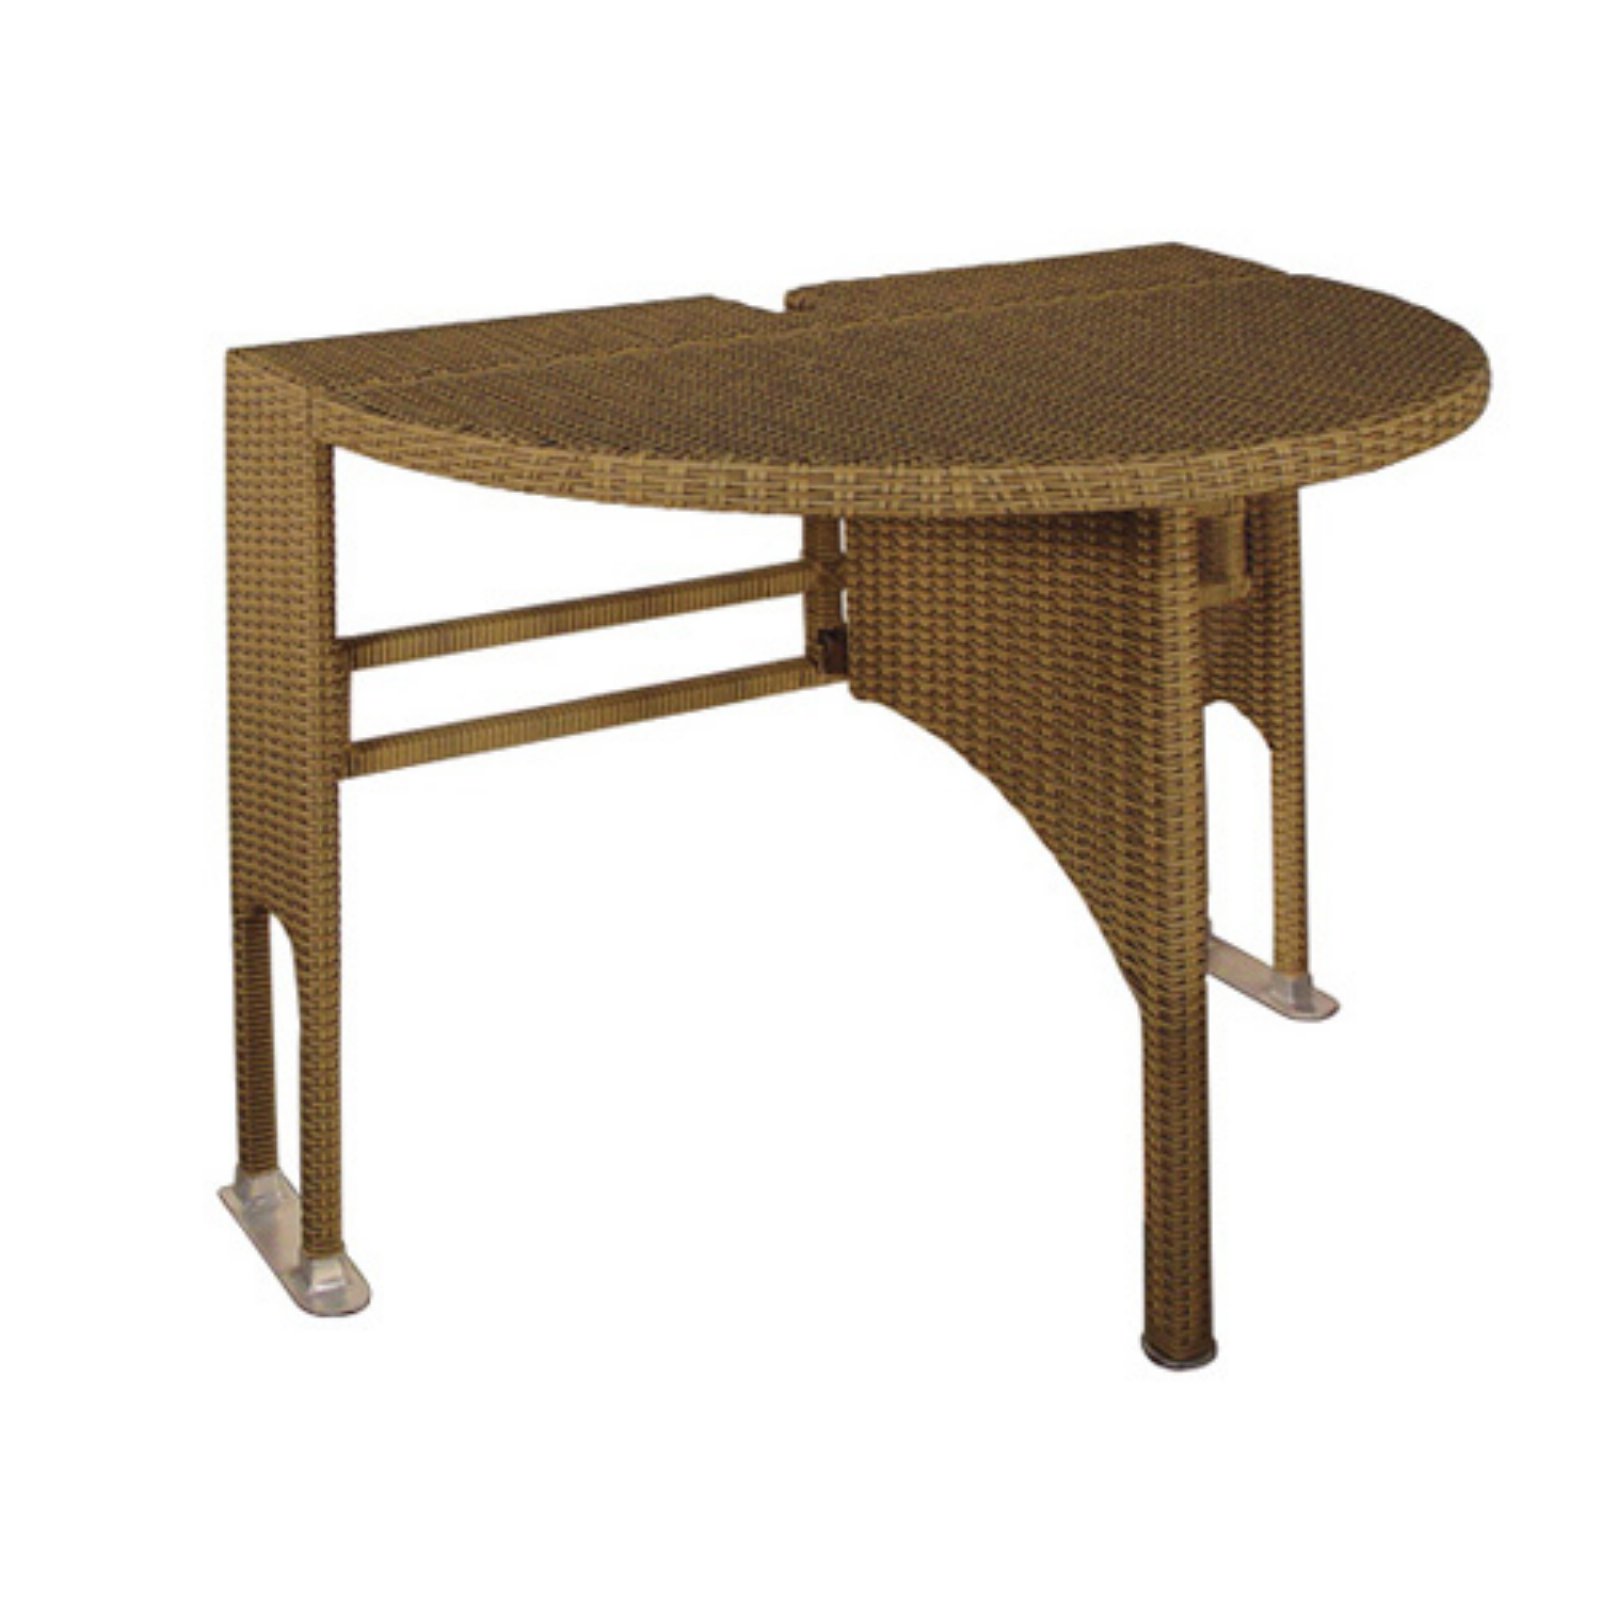 Blue Star Group Terrace Mates Adena All-Weather Wicker Coffee Color Table Set w/ 9'-Wide OFF-THE-WALL BRELLA - Green Olefin Canopy - image 3 of 9